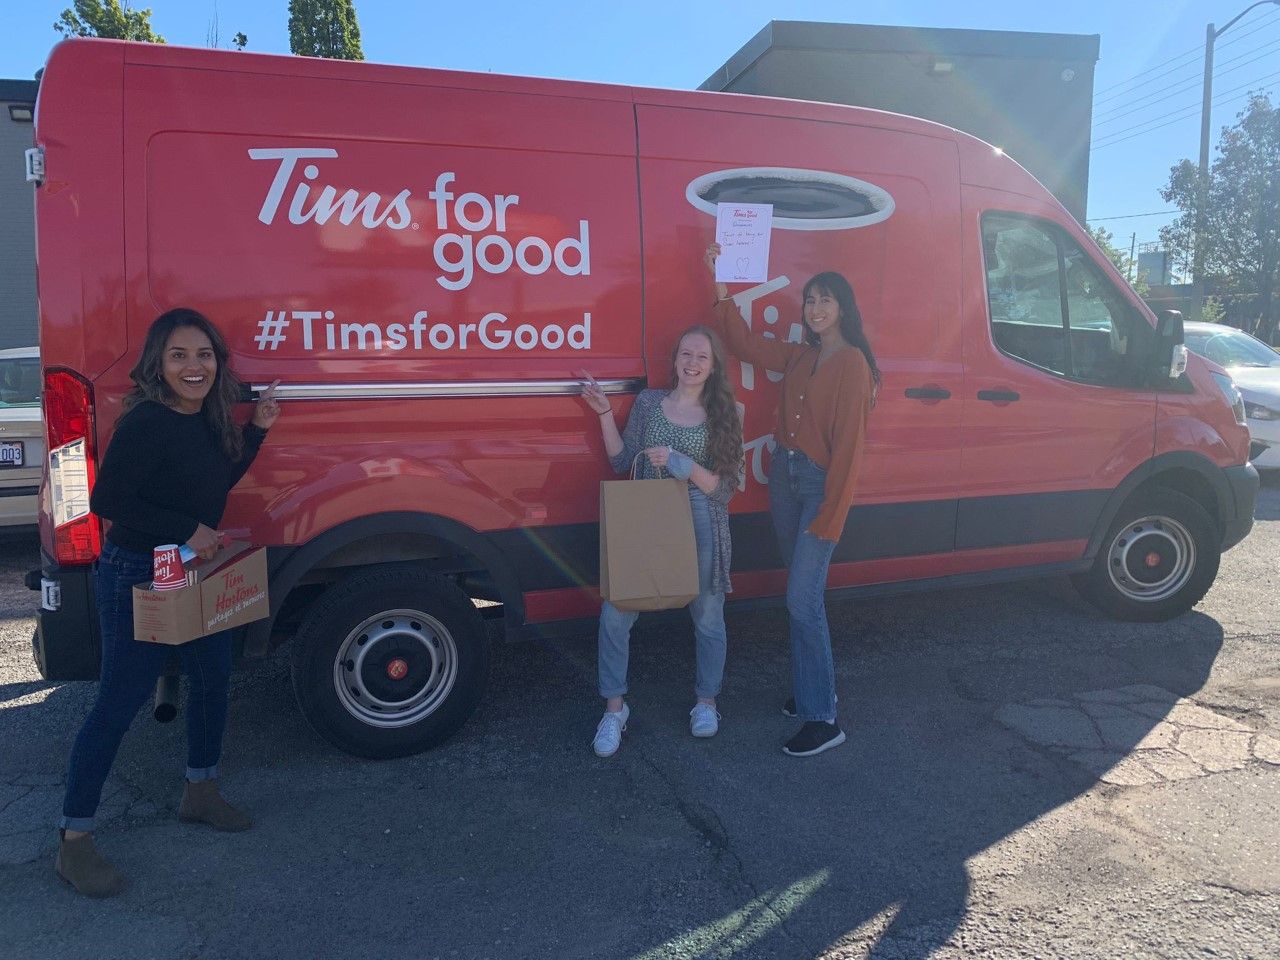 Amadeusz was nominated for the #TimsforGood campaign and received coffee and baked goods as a special treat (September 2021)